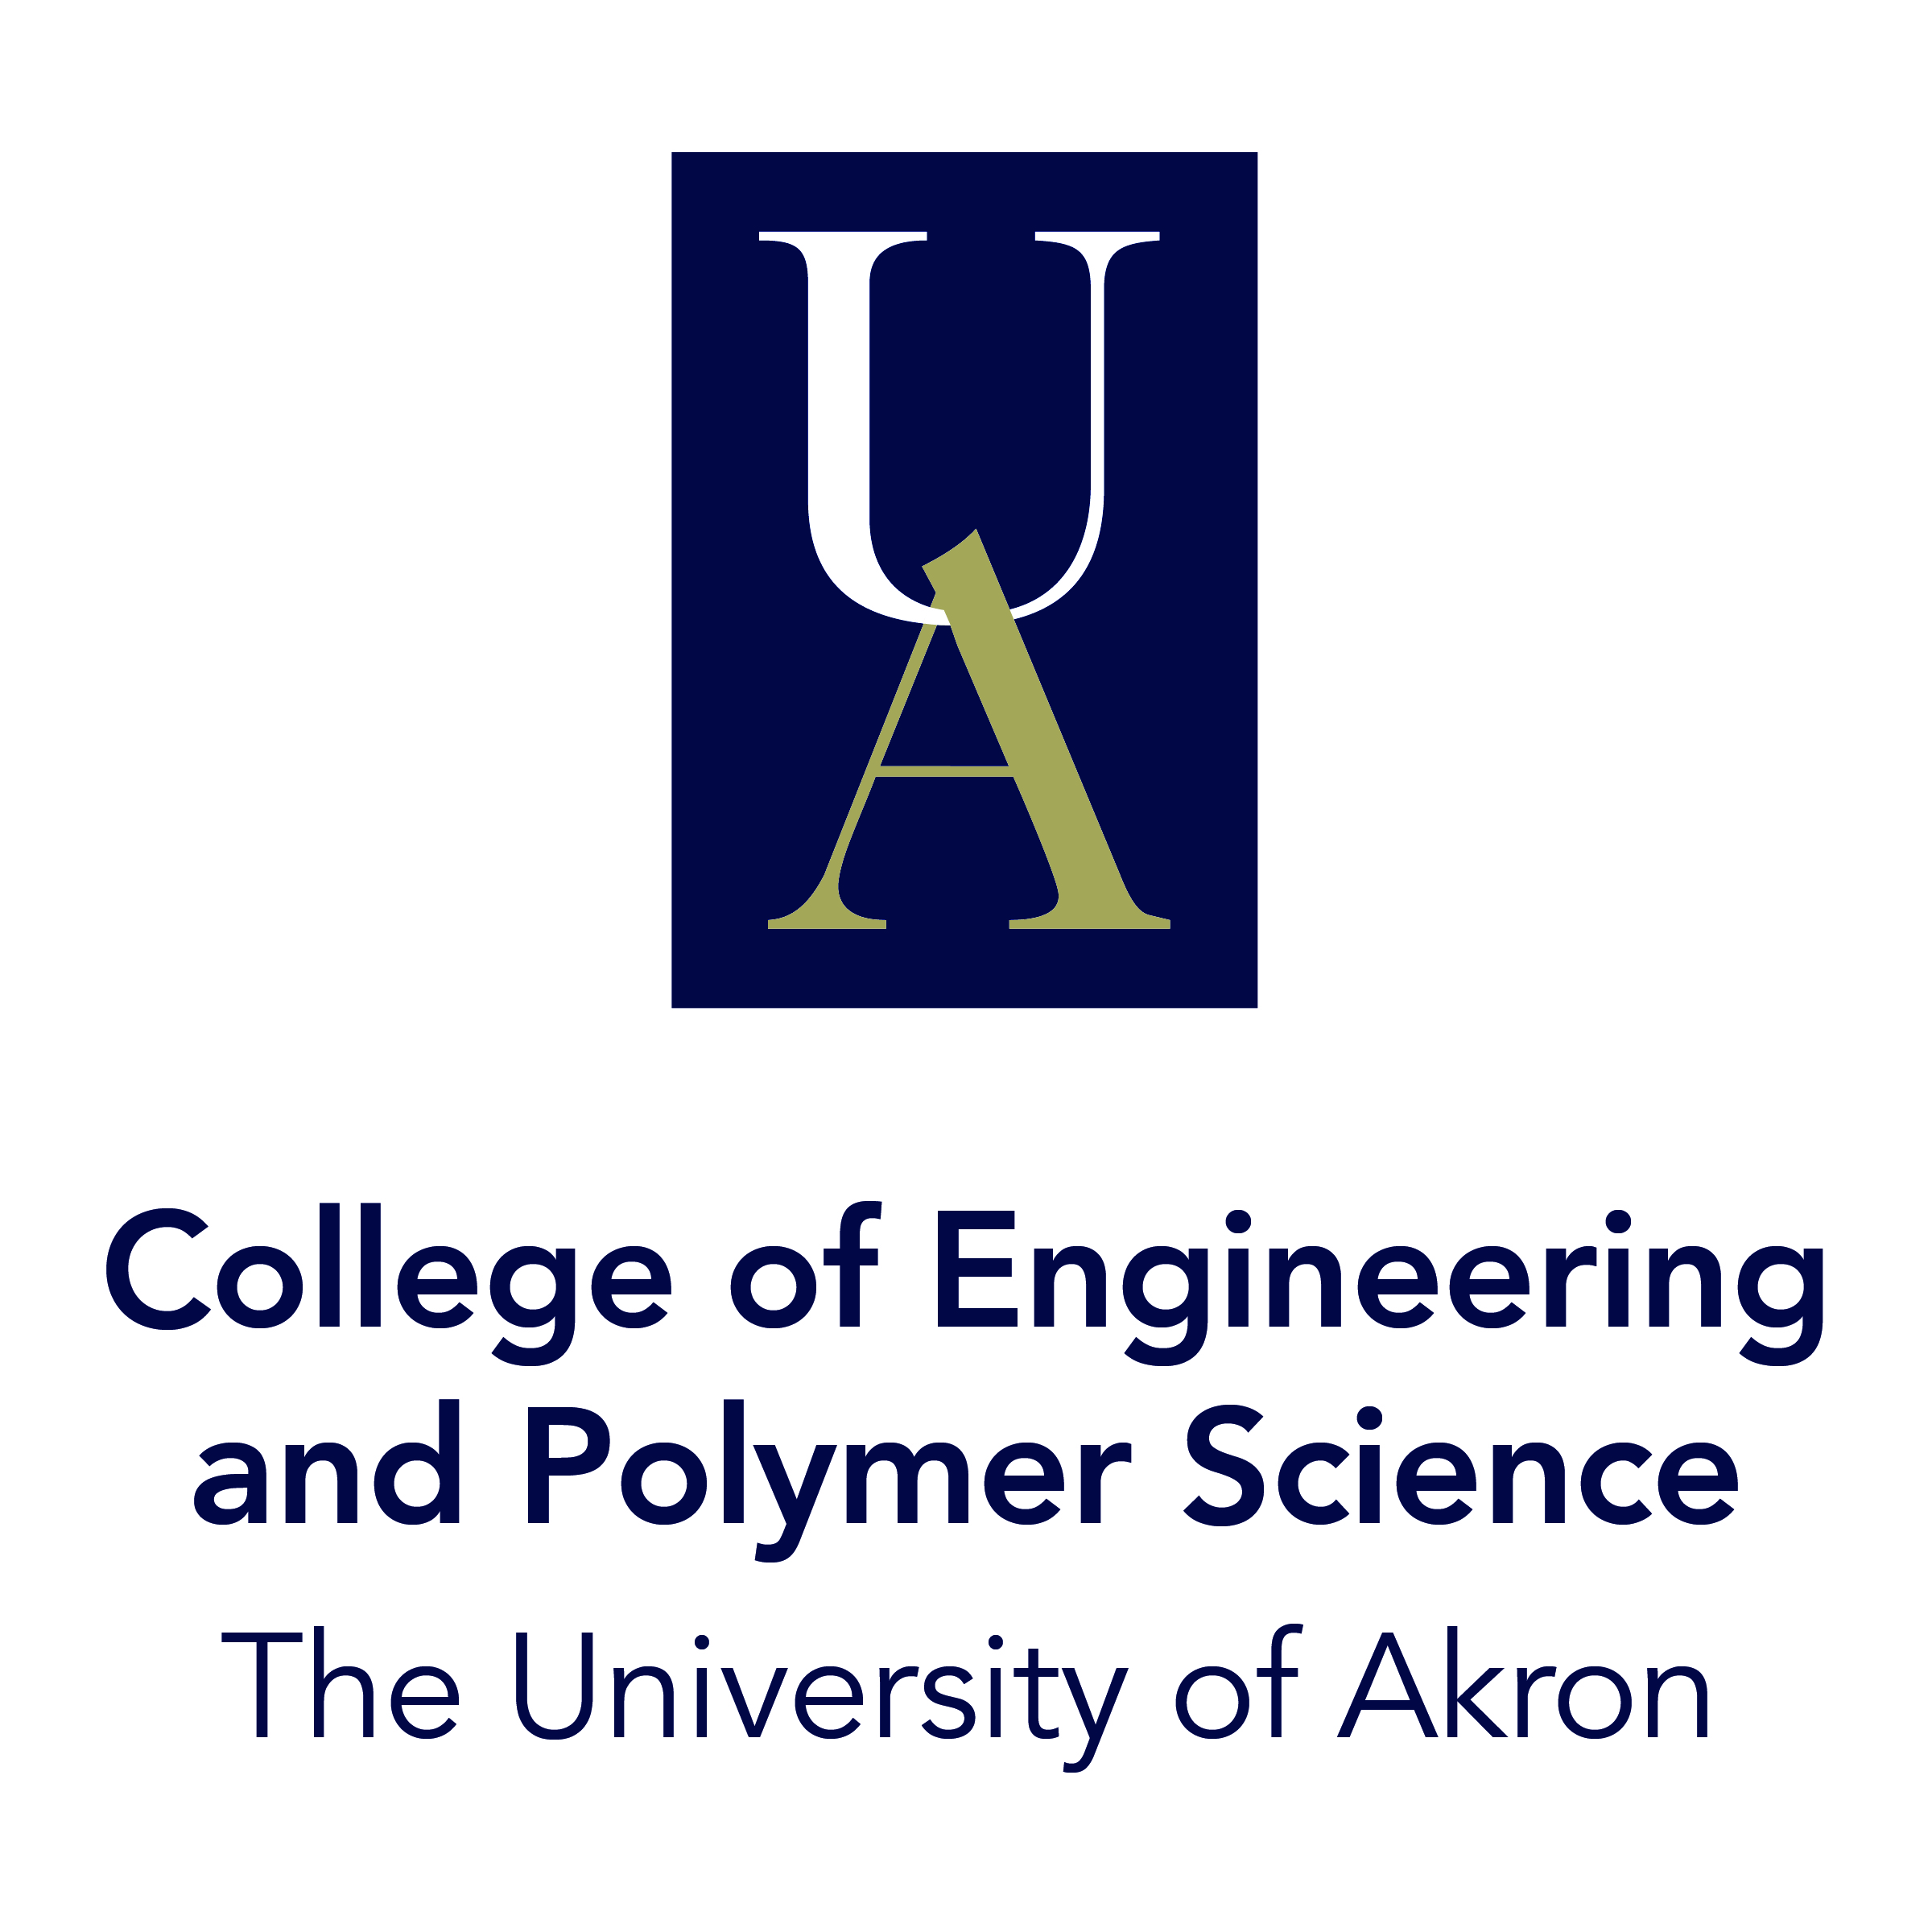 College of Engineering and Polymer Science